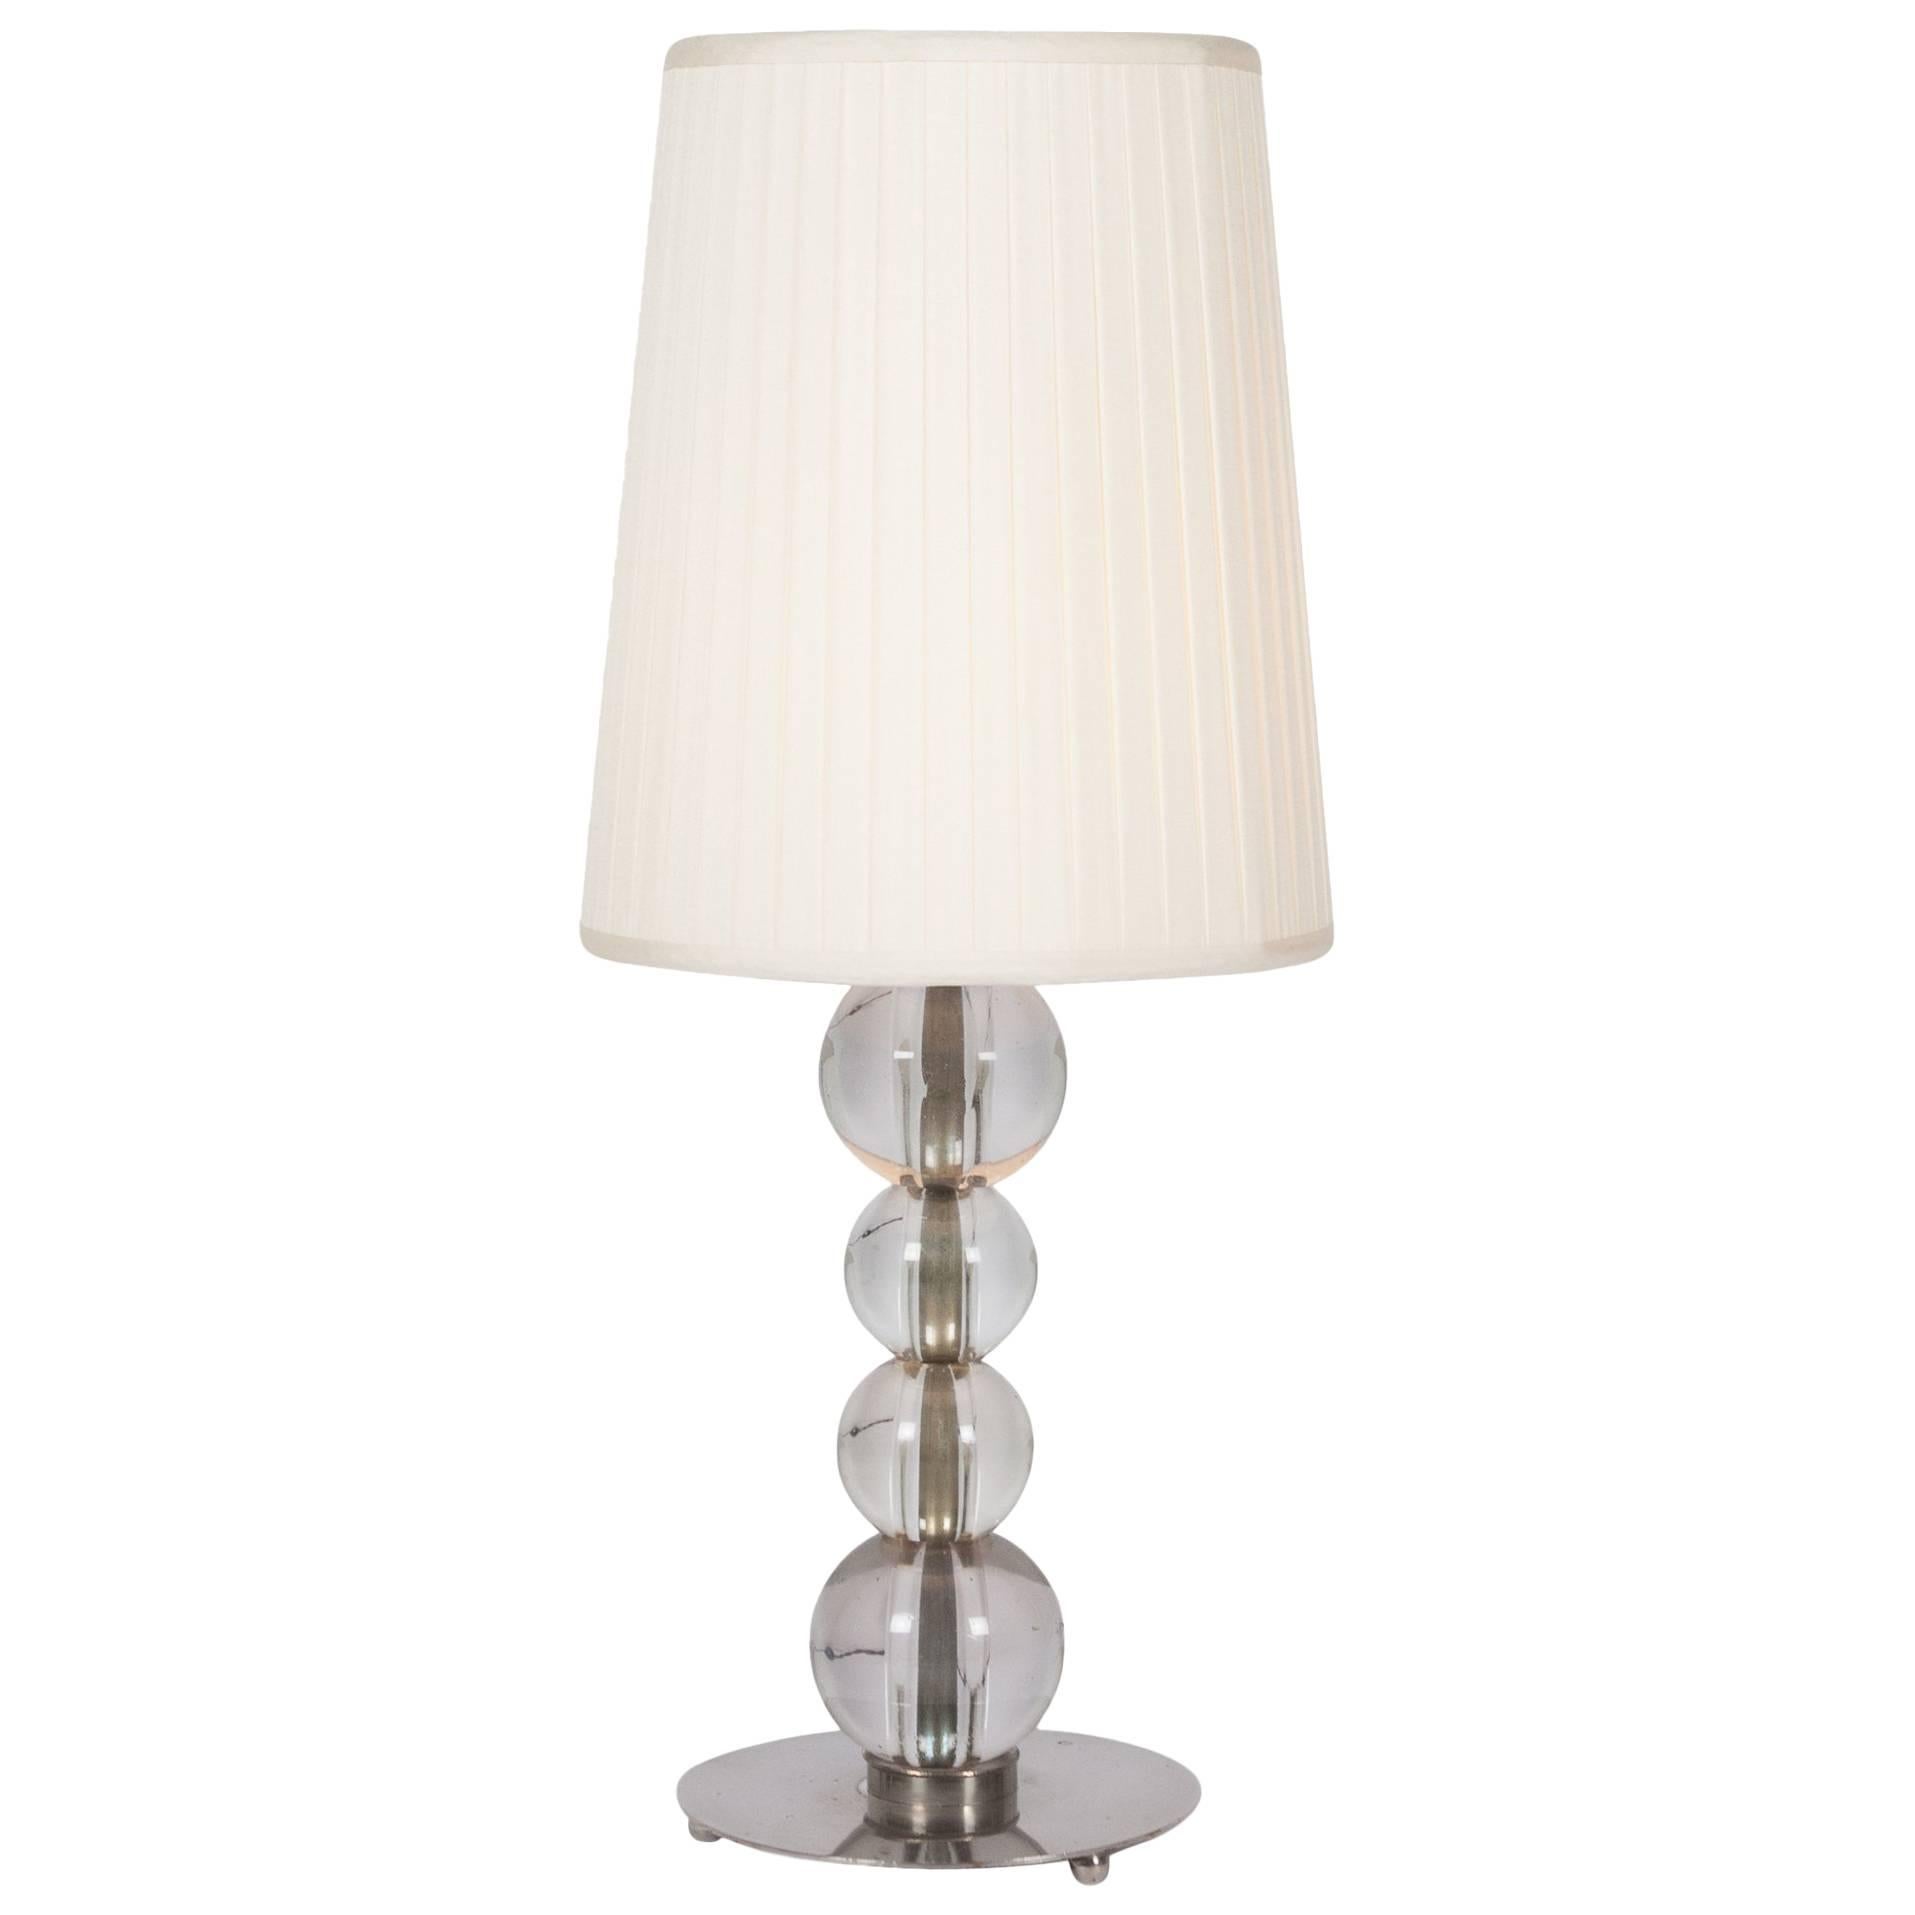 Jacques Adnet Attrib. Stacked Glass Ball Table Lamp, French, 1930s For Sale